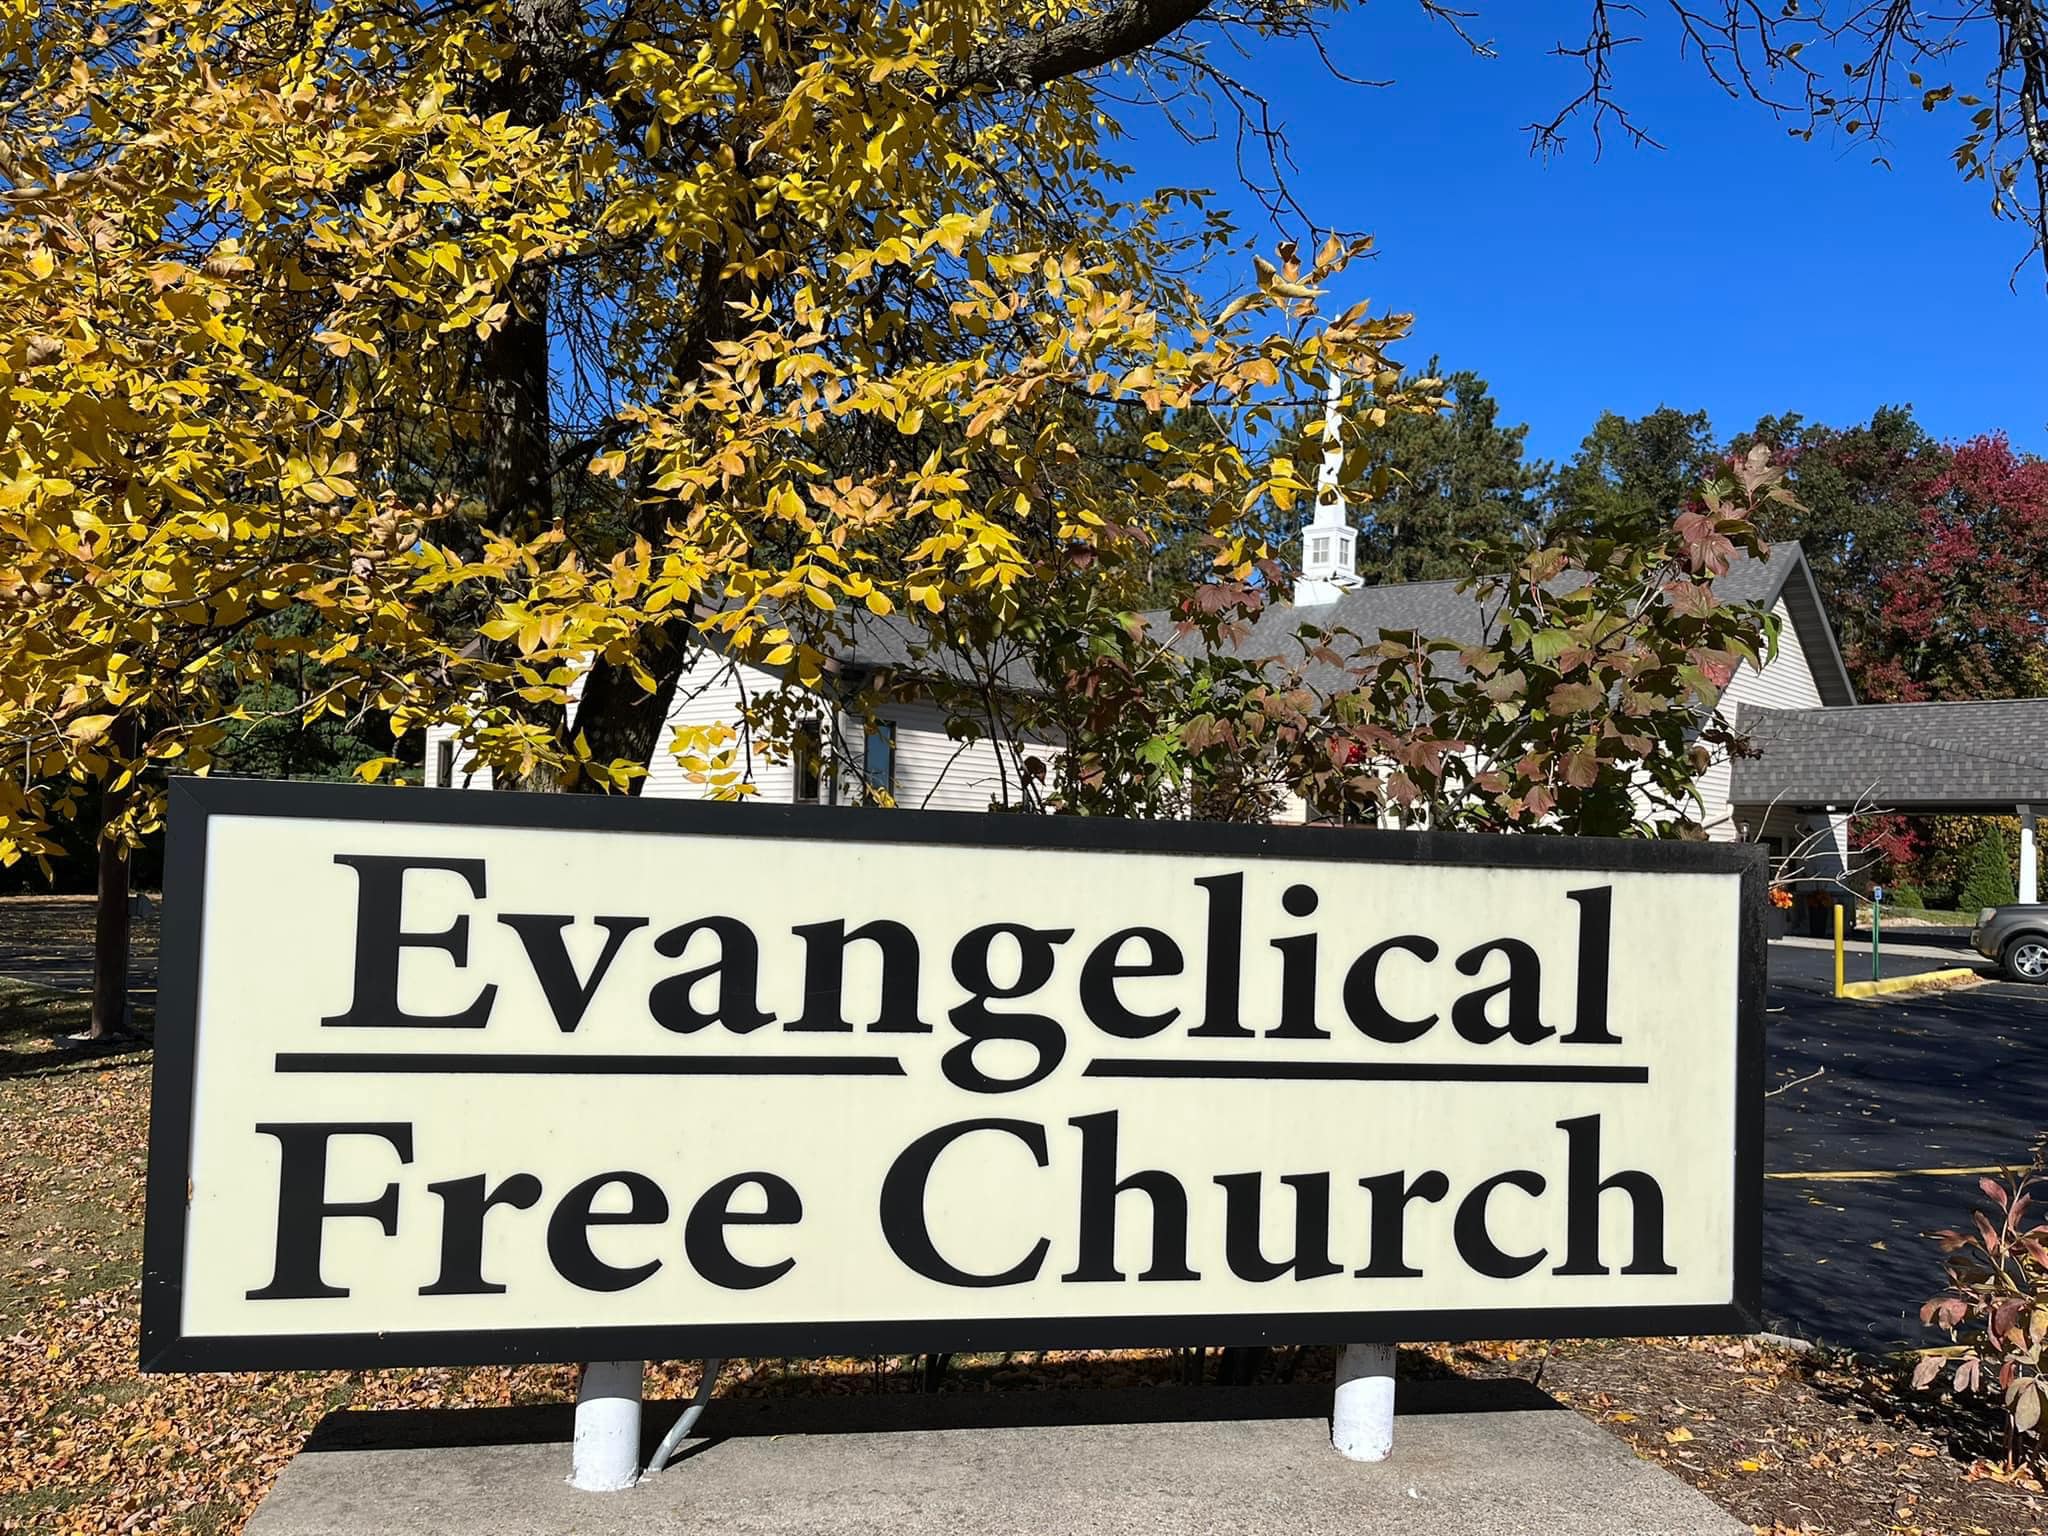 evangelical Free church sign